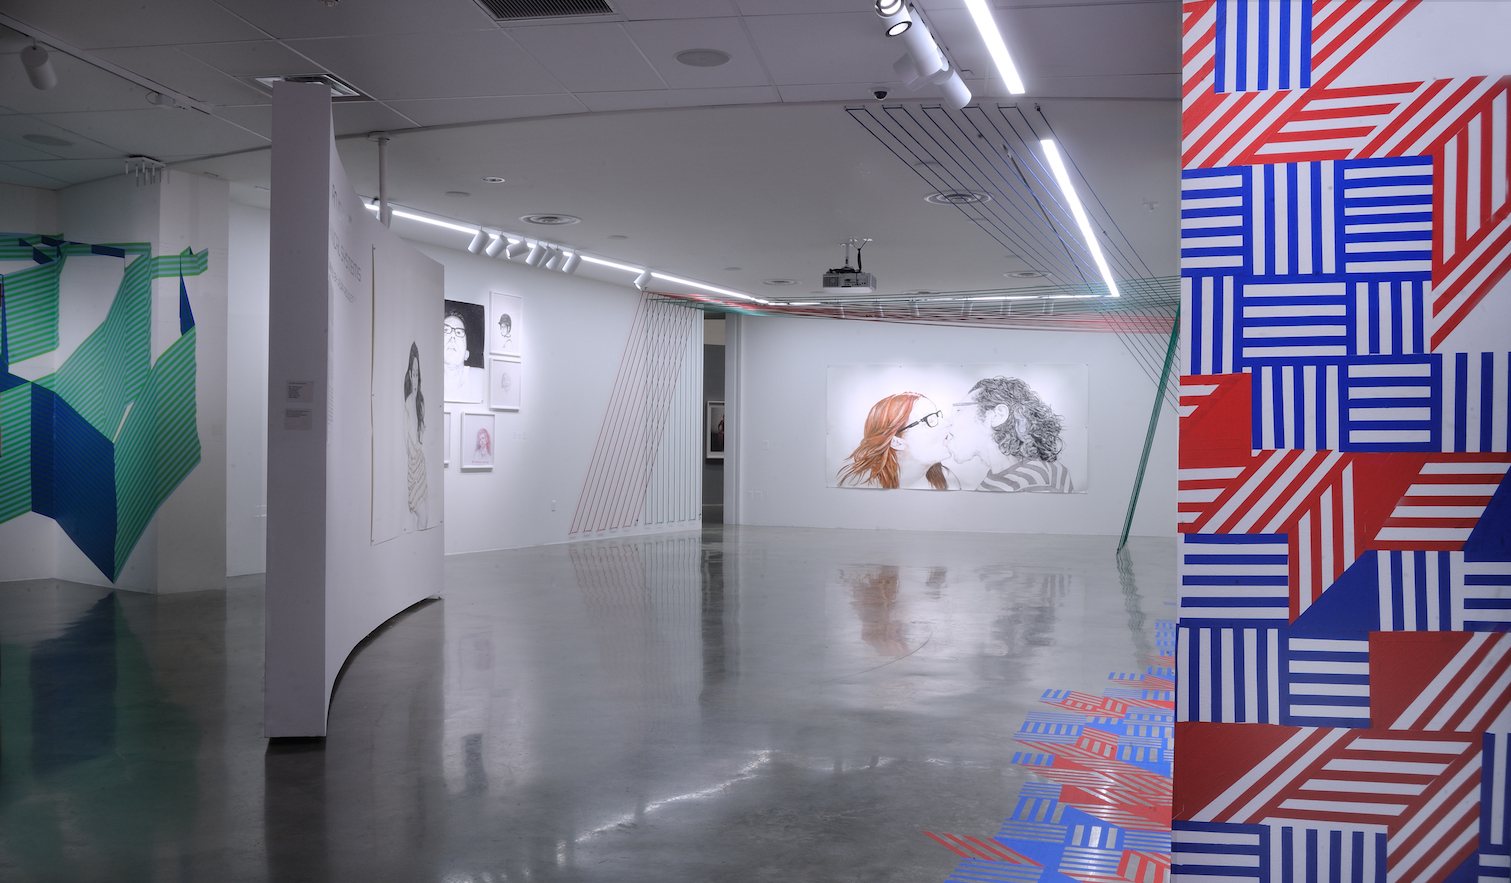 Installation view of multimedia exhibition with portraiture and bungee cords